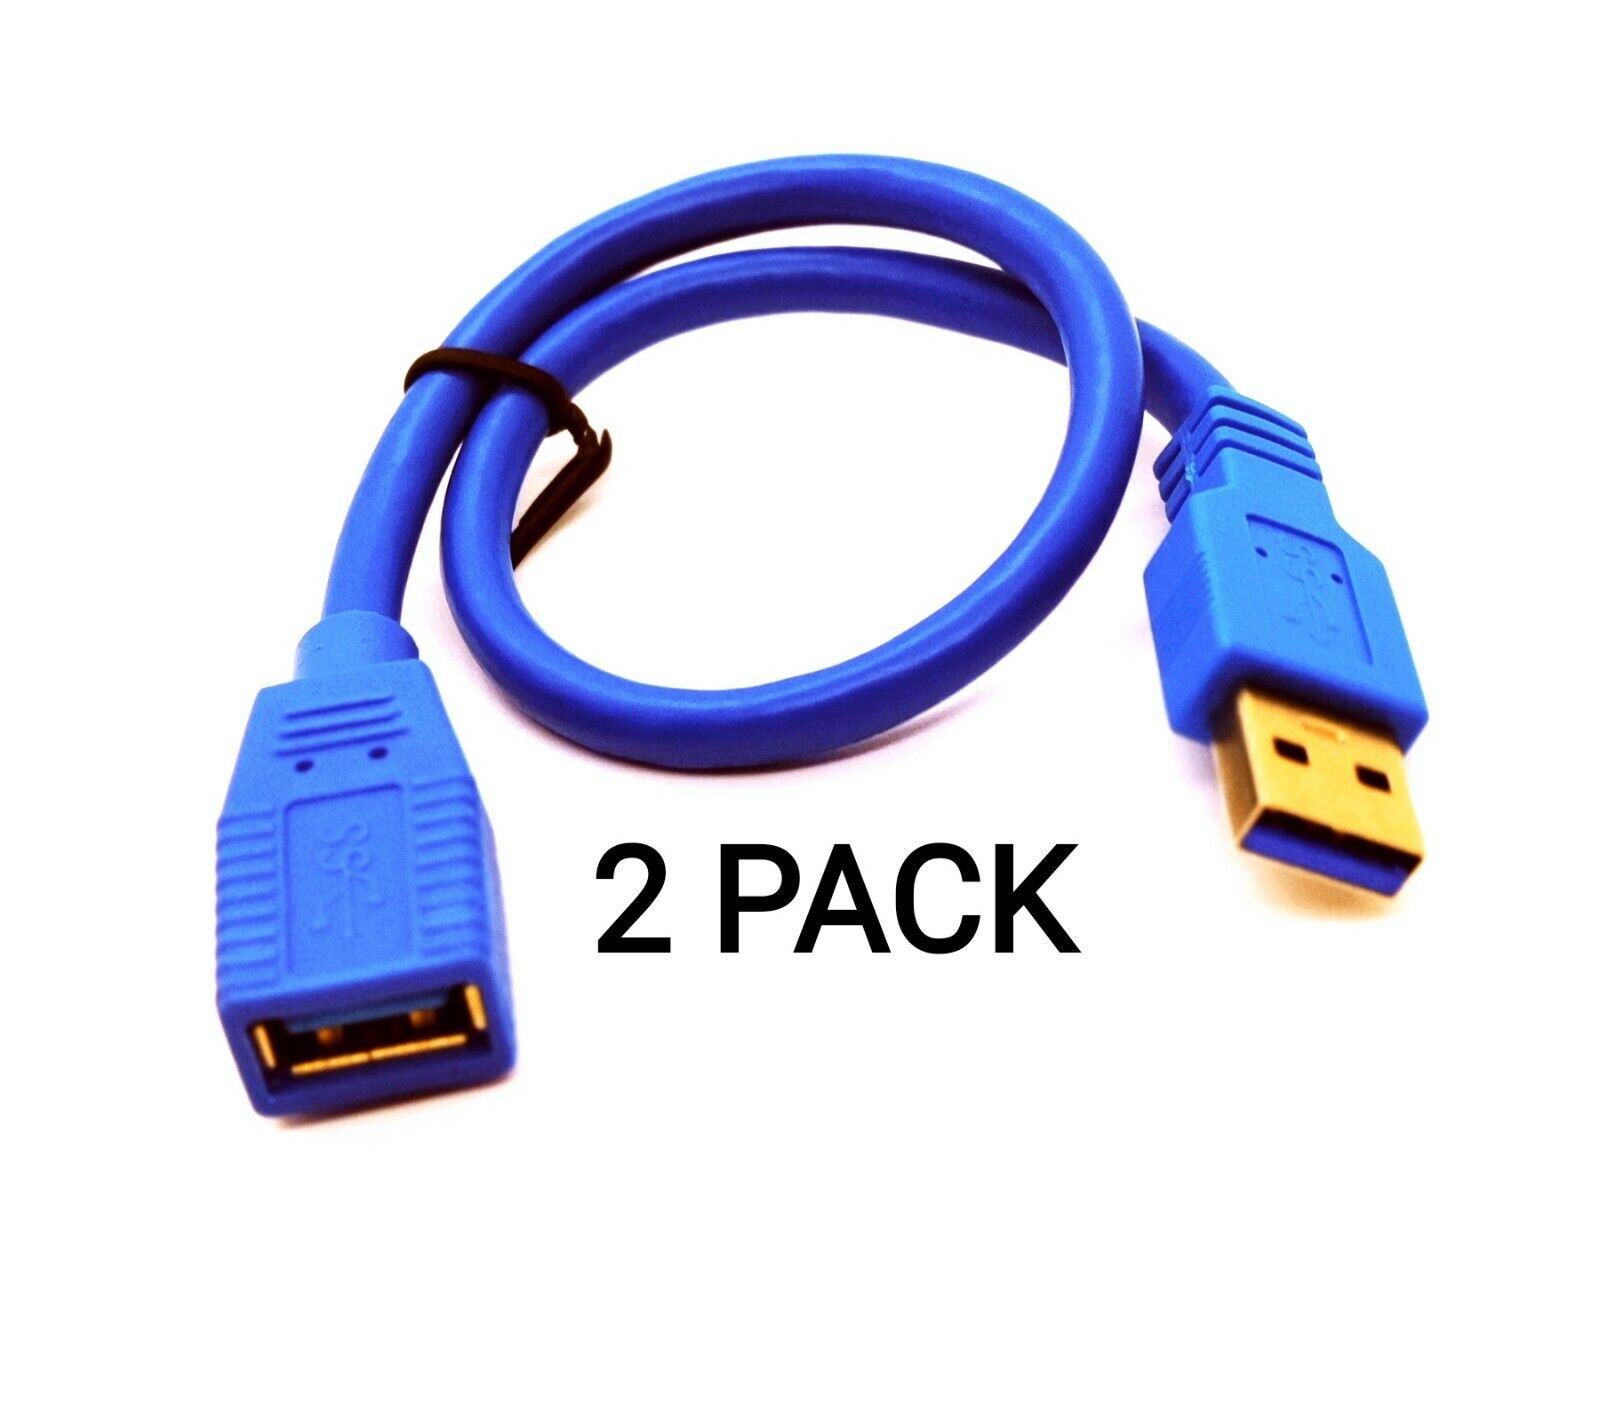 2PACK 1Ft USB 3.0 Extension Cable Gold Plate Type A Male to Female Blue Color